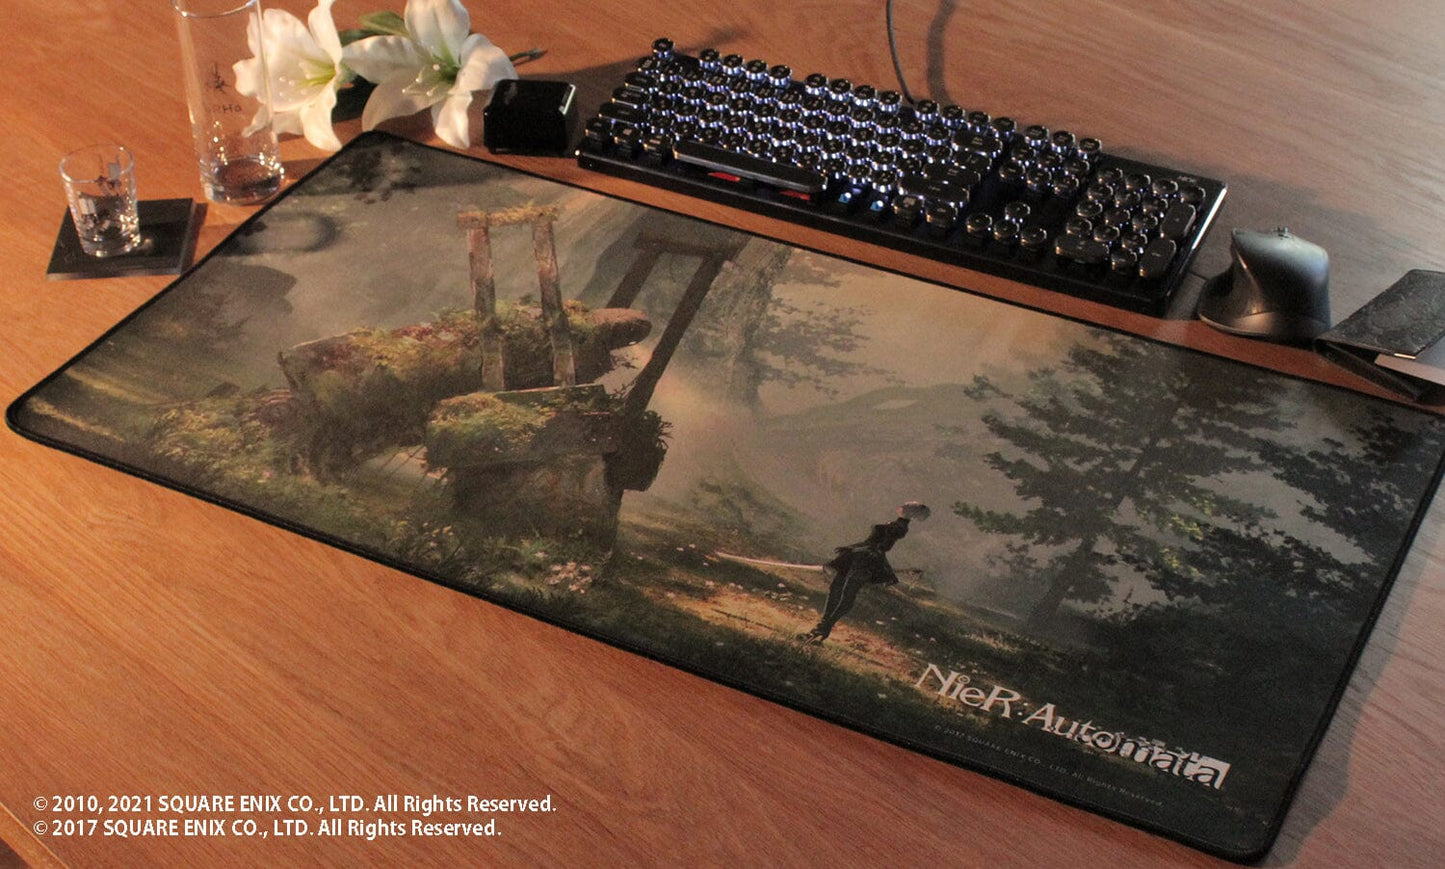 "NieR:Automata" Gaming Mouse Pad Vol. 1 Variety Anime Goods Square Enix 